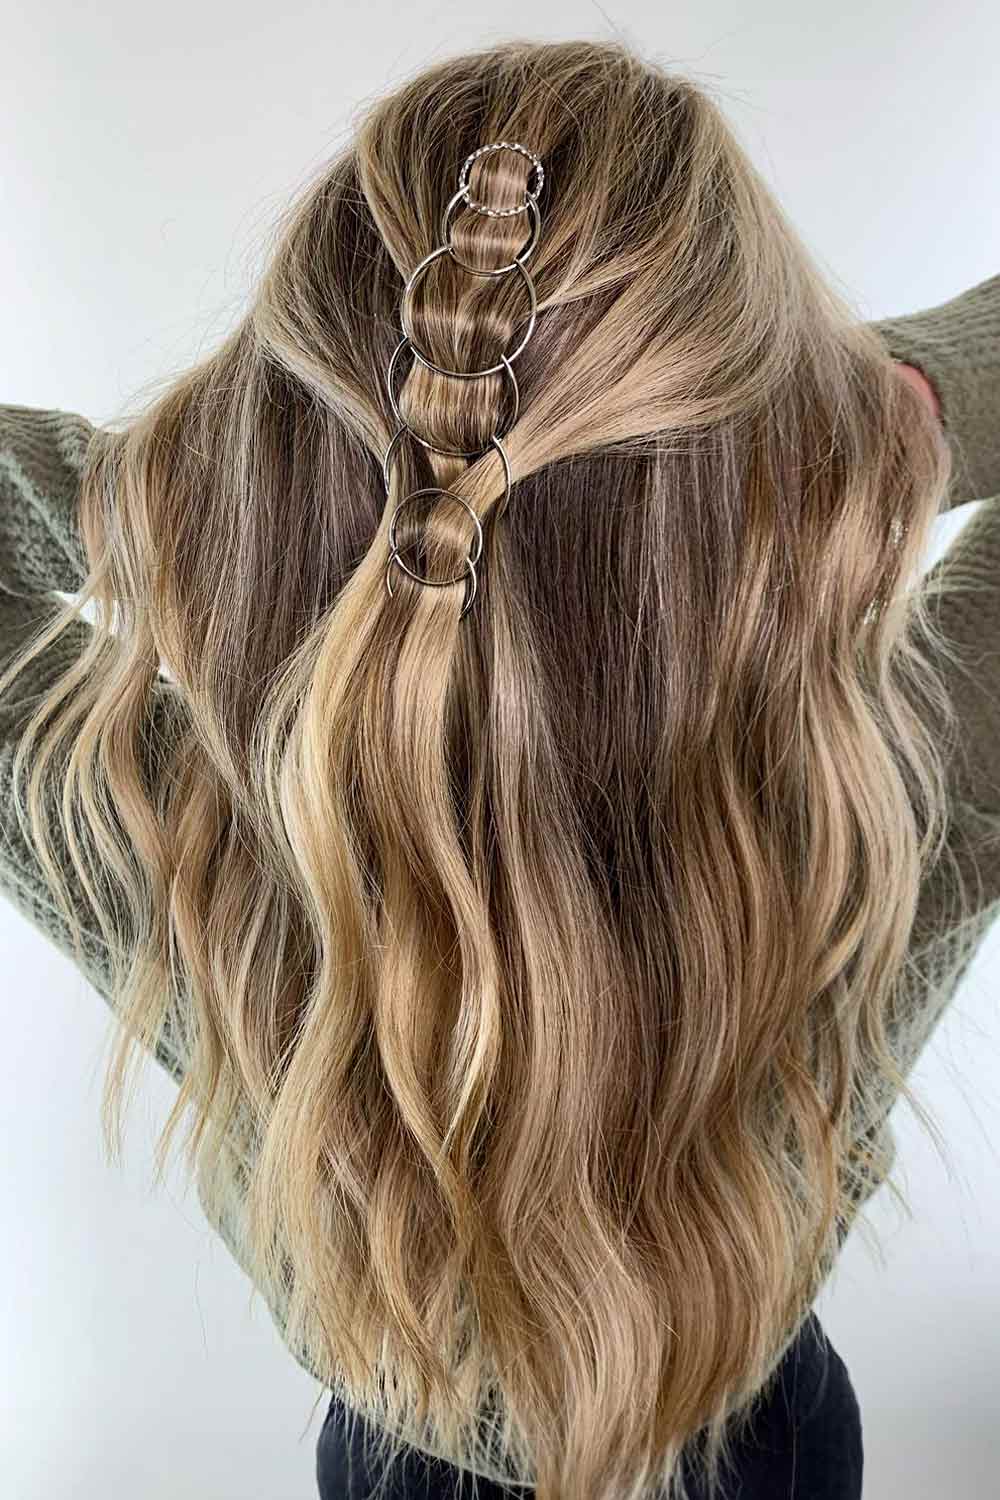 Dirty Blonde Ombre Hairstyles With Long Layers #dirtyblondehair #dirtyblonde #blondehair #blonde